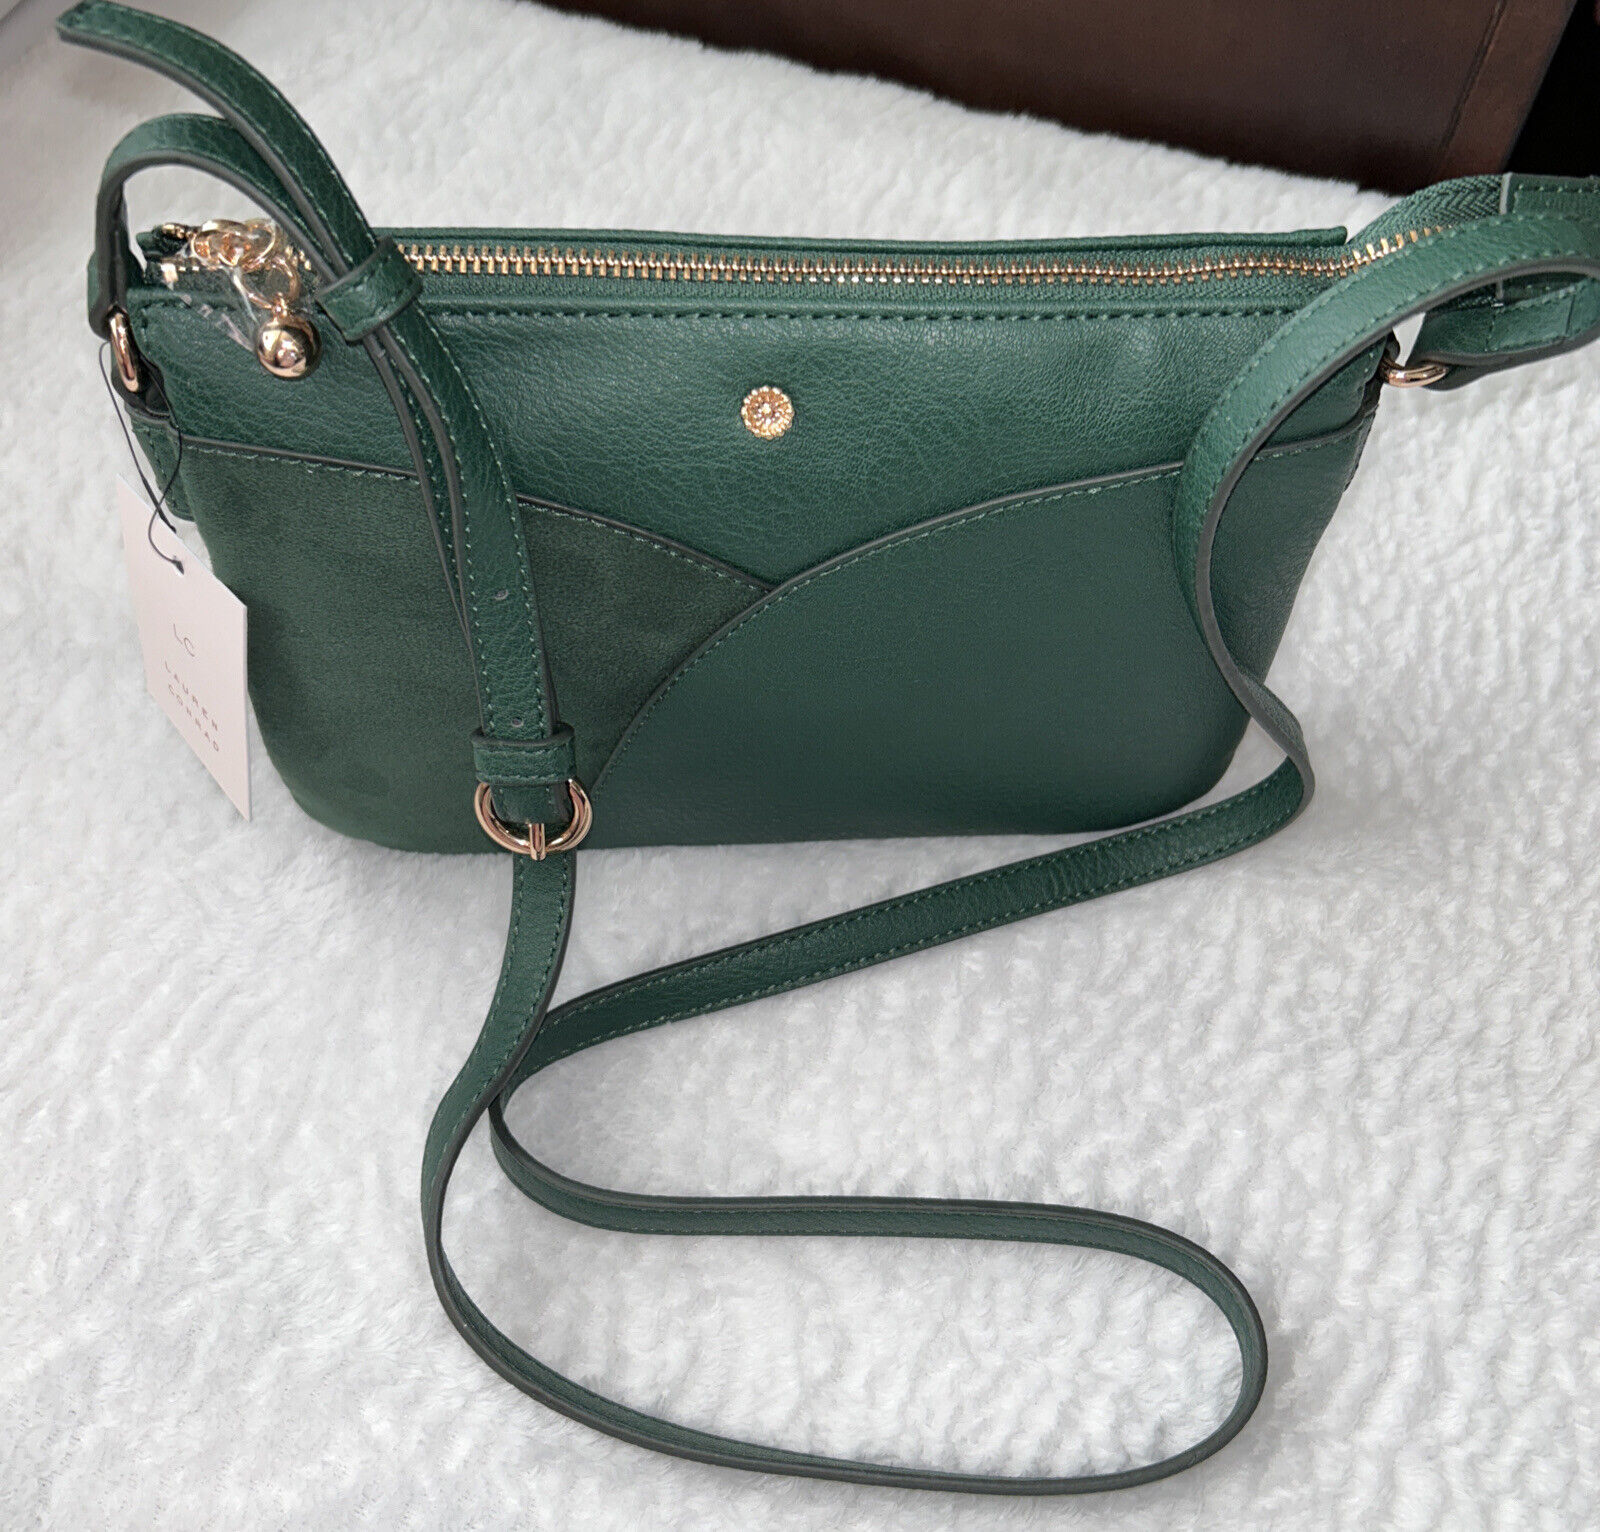 LC Lauren Conrad Crossbody Bag Mint Green Candide Purse New With Tags